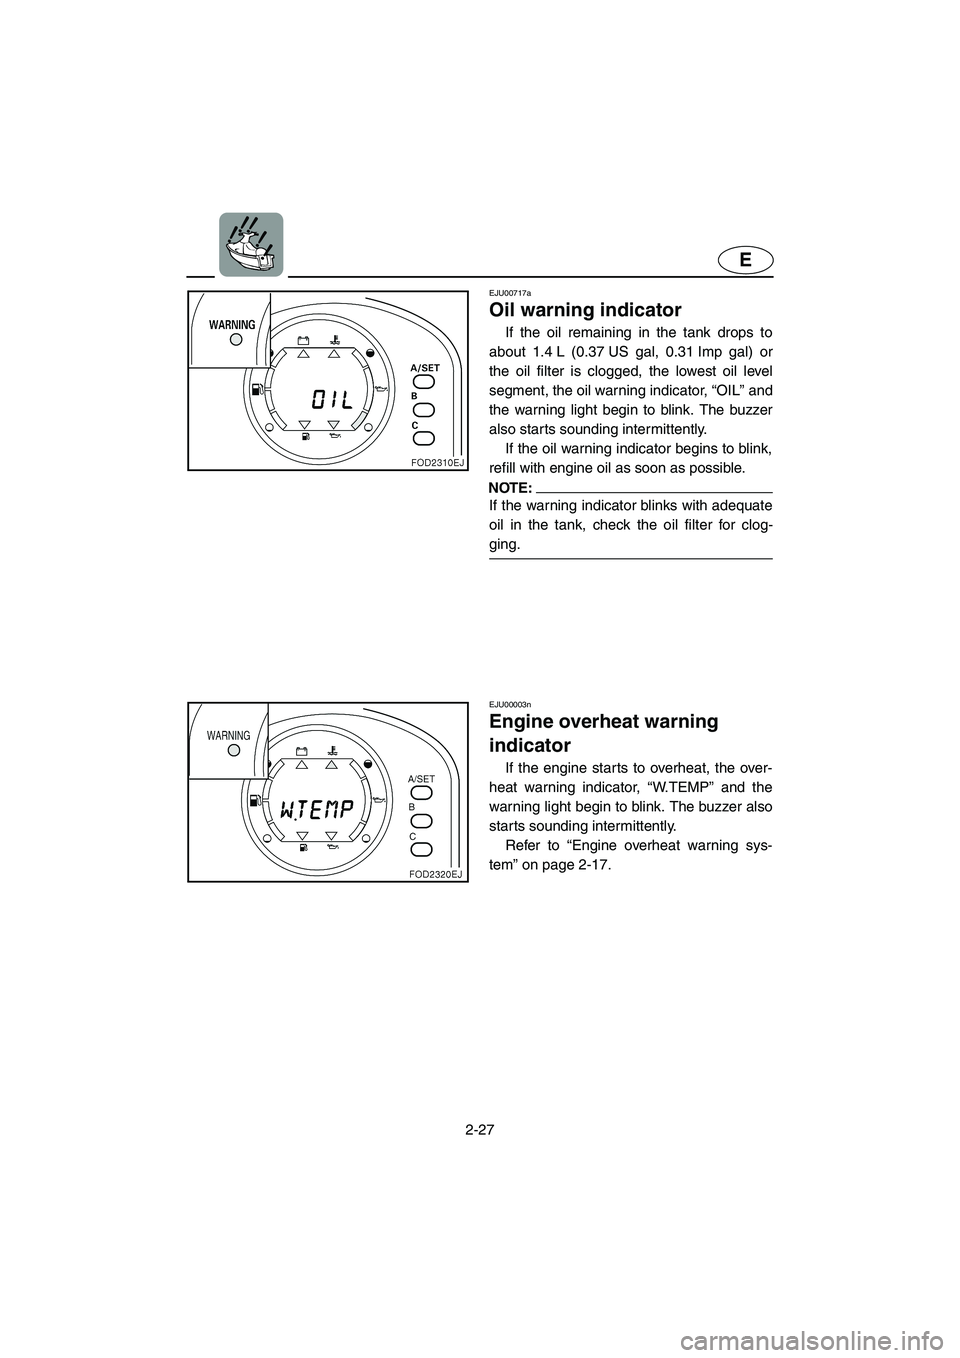 YAMAHA XL 800 2001  Owners Manual 2-27
E
EJU00717a
Oil warning indicator
If the oil remaining in the tank drops to
about 1.4 L (0.37 US gal, 0.31 Imp gal) or
the oil filter is clogged, the lowest oil level
segment, the oil warning ind